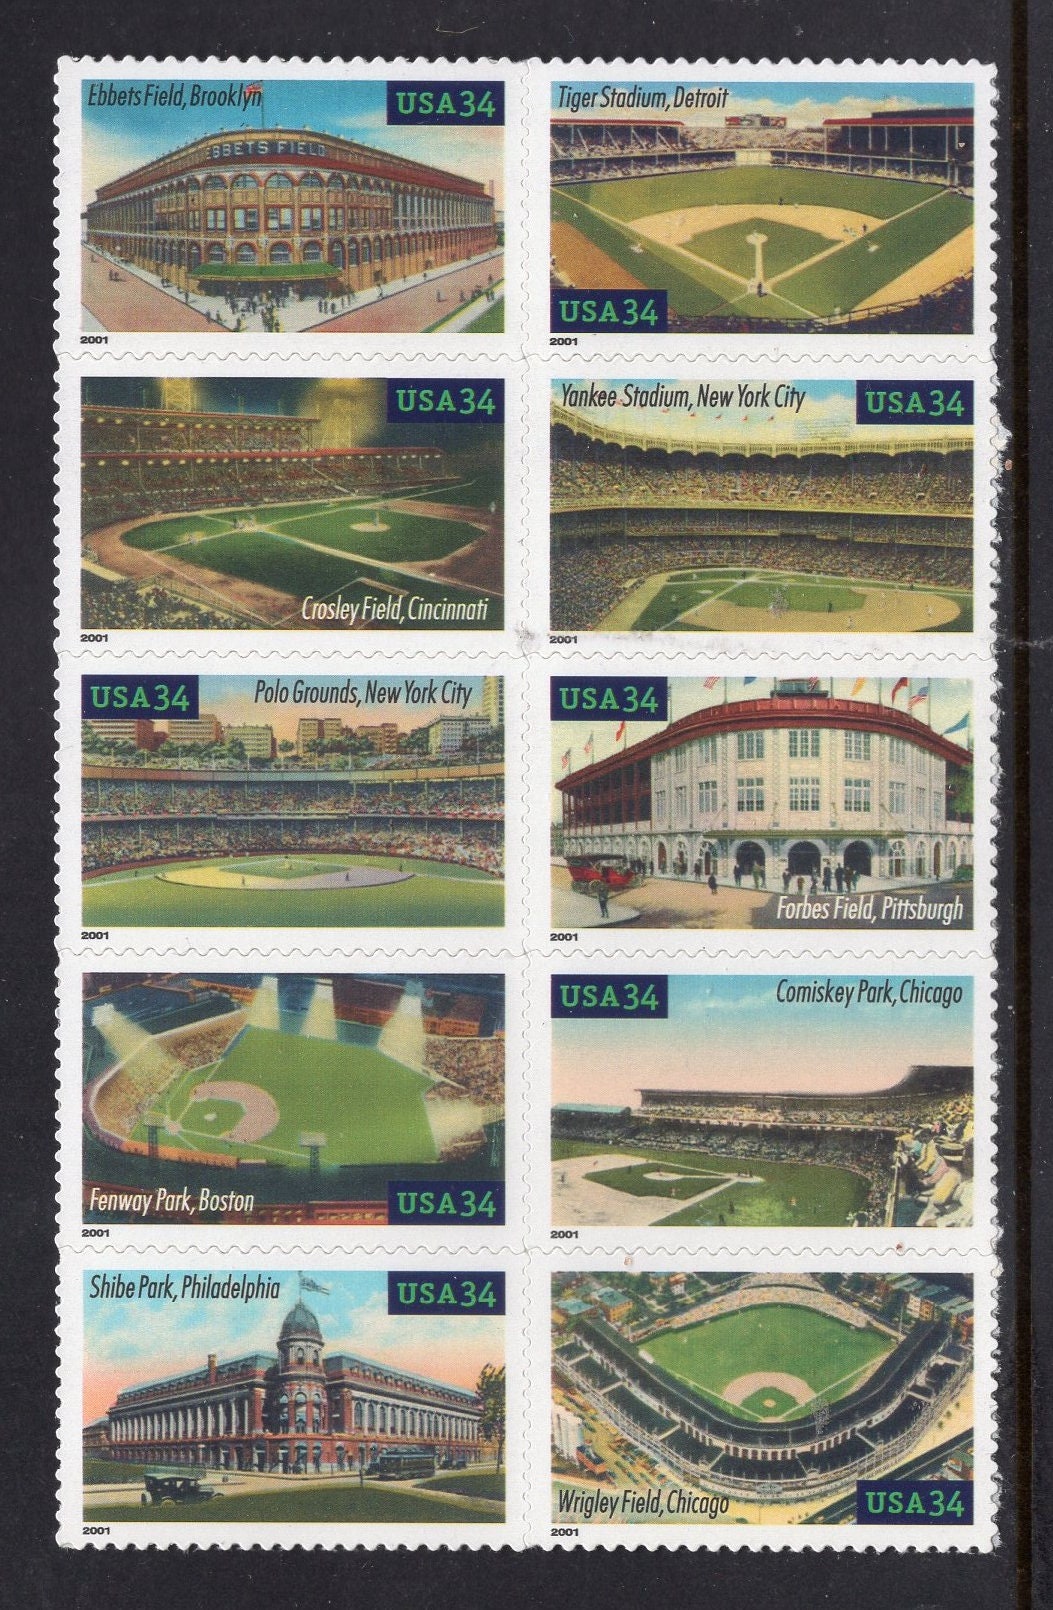 10 BASEBALL LEGENDARY STADIUMS Ball Parks Playing Fields Block w/Back Text (get 2 to display both sides)- Issued in 2001 - 3510BL -